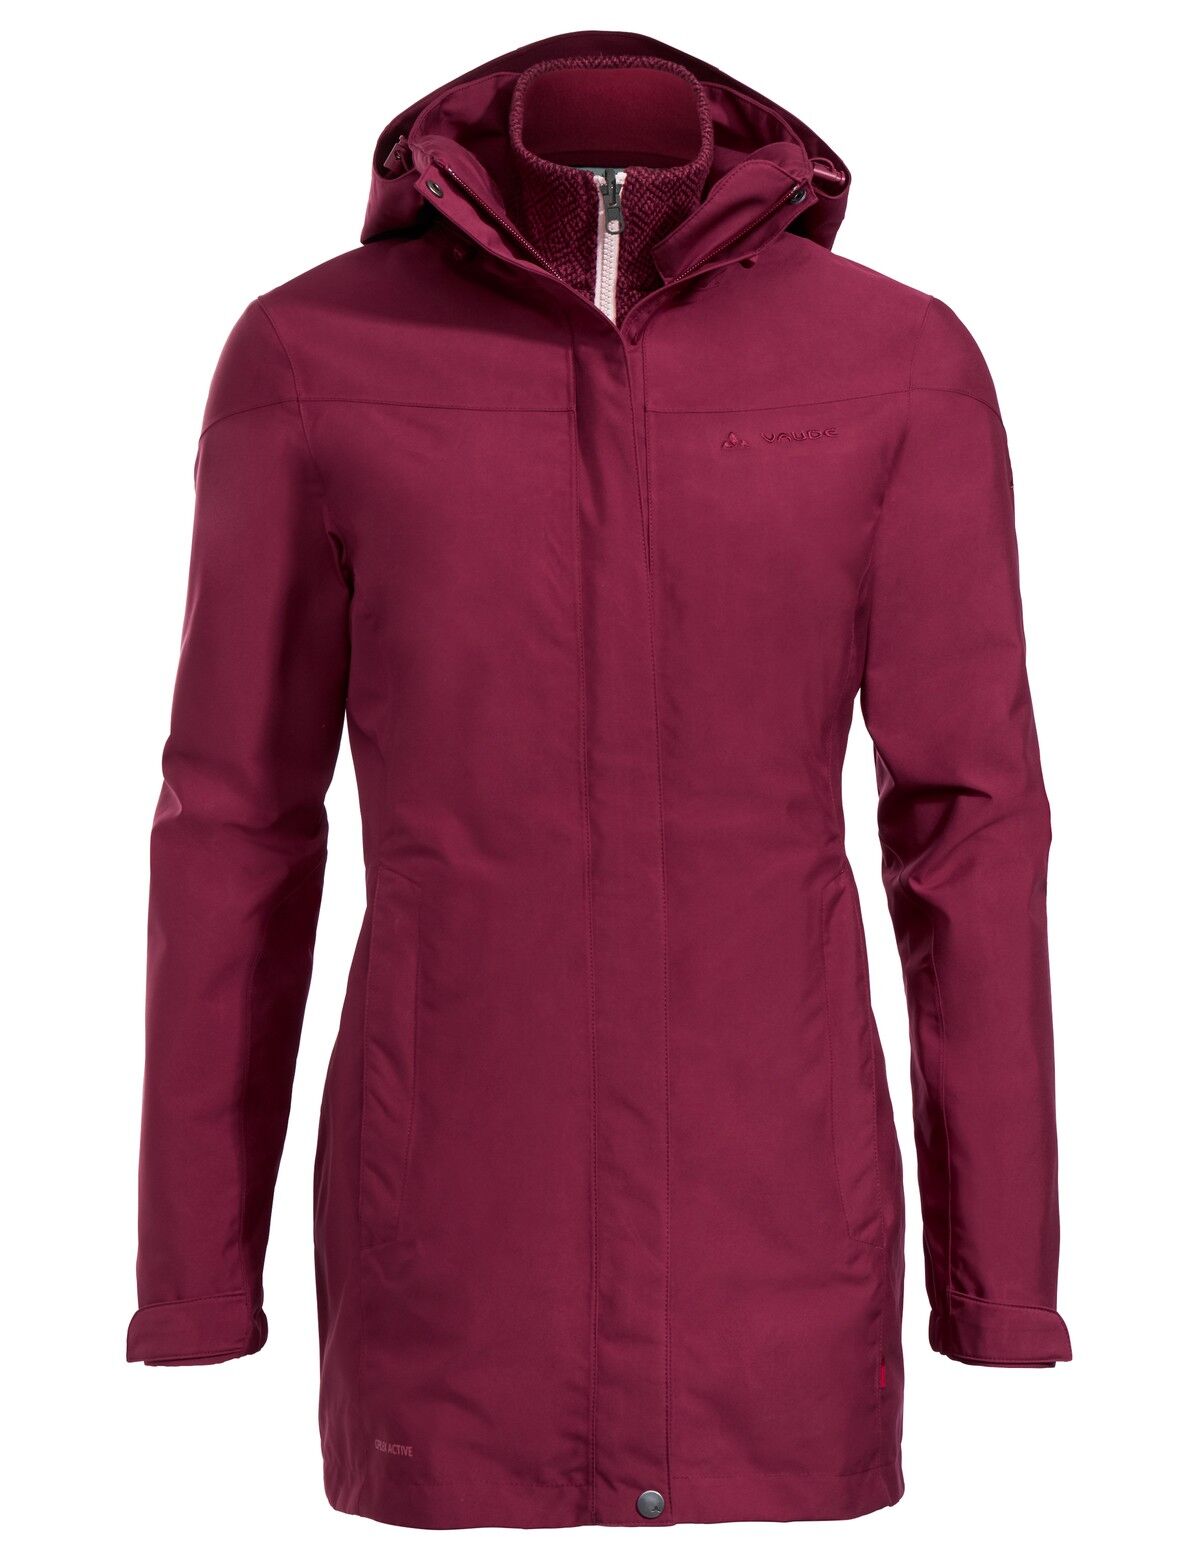 Vaude - Idris 3in1 Parka II - Giacca invernale - Donna